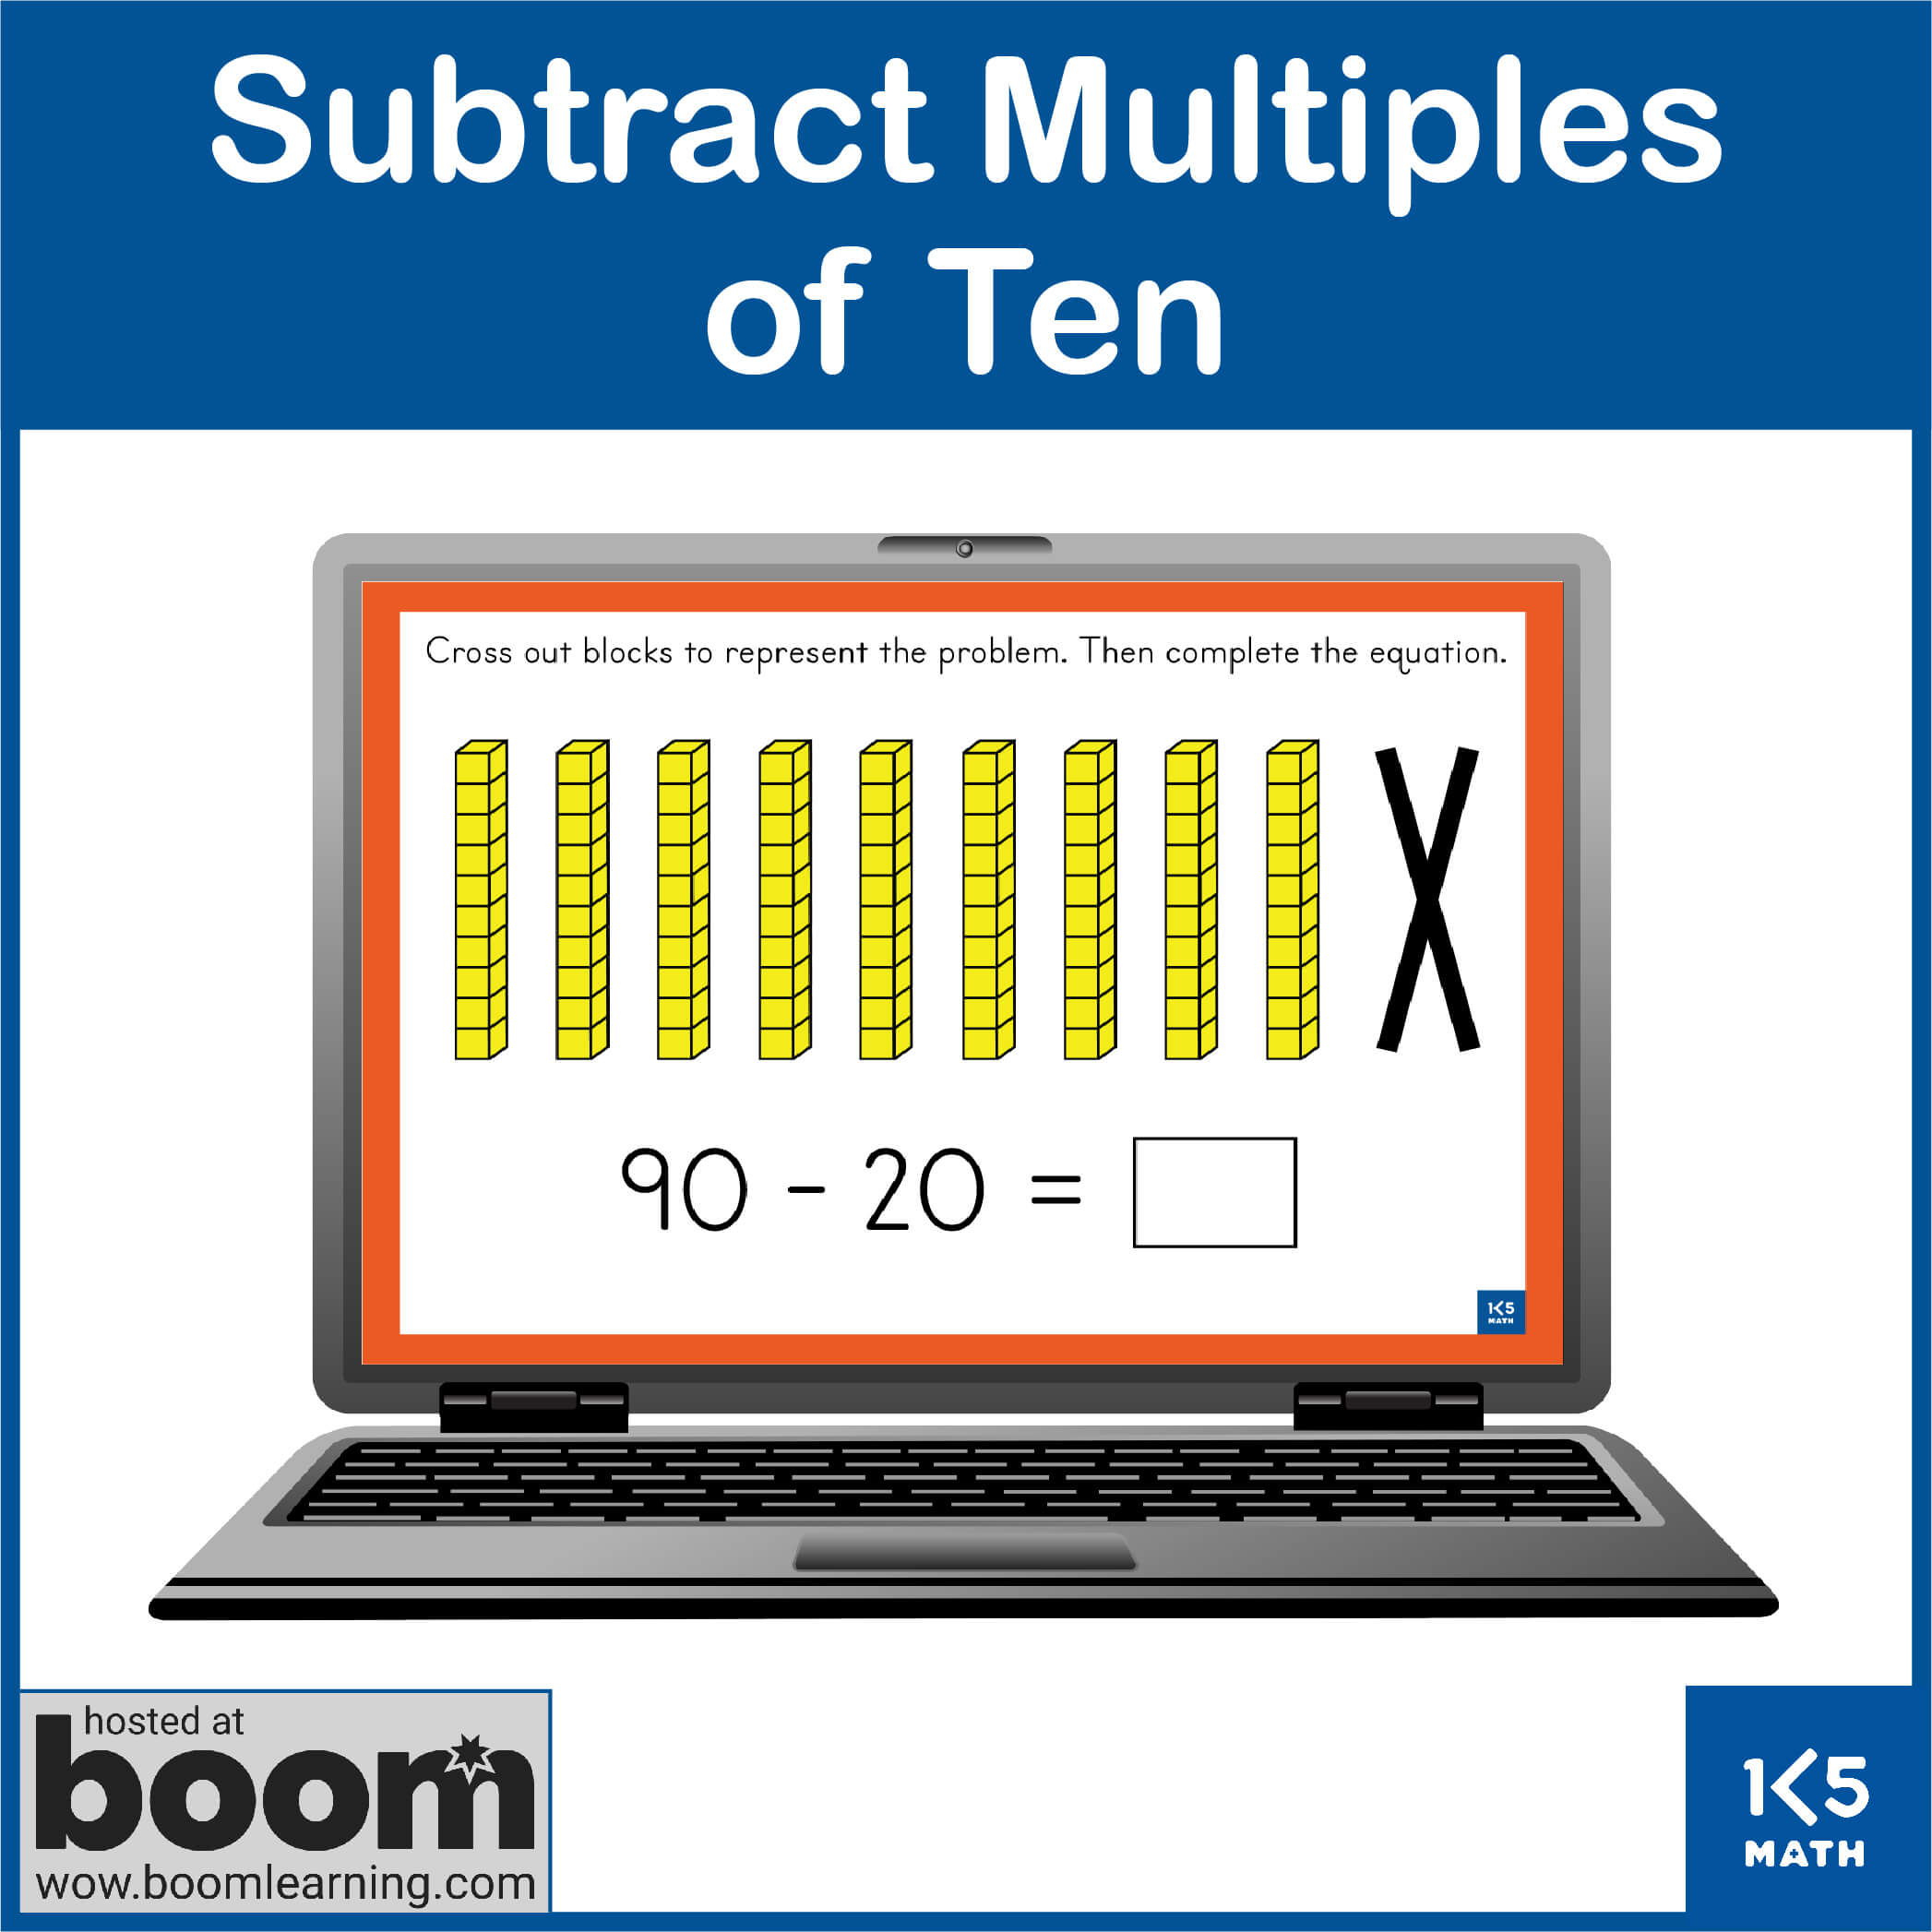 Boom Cards: Subtract Multiples of 10